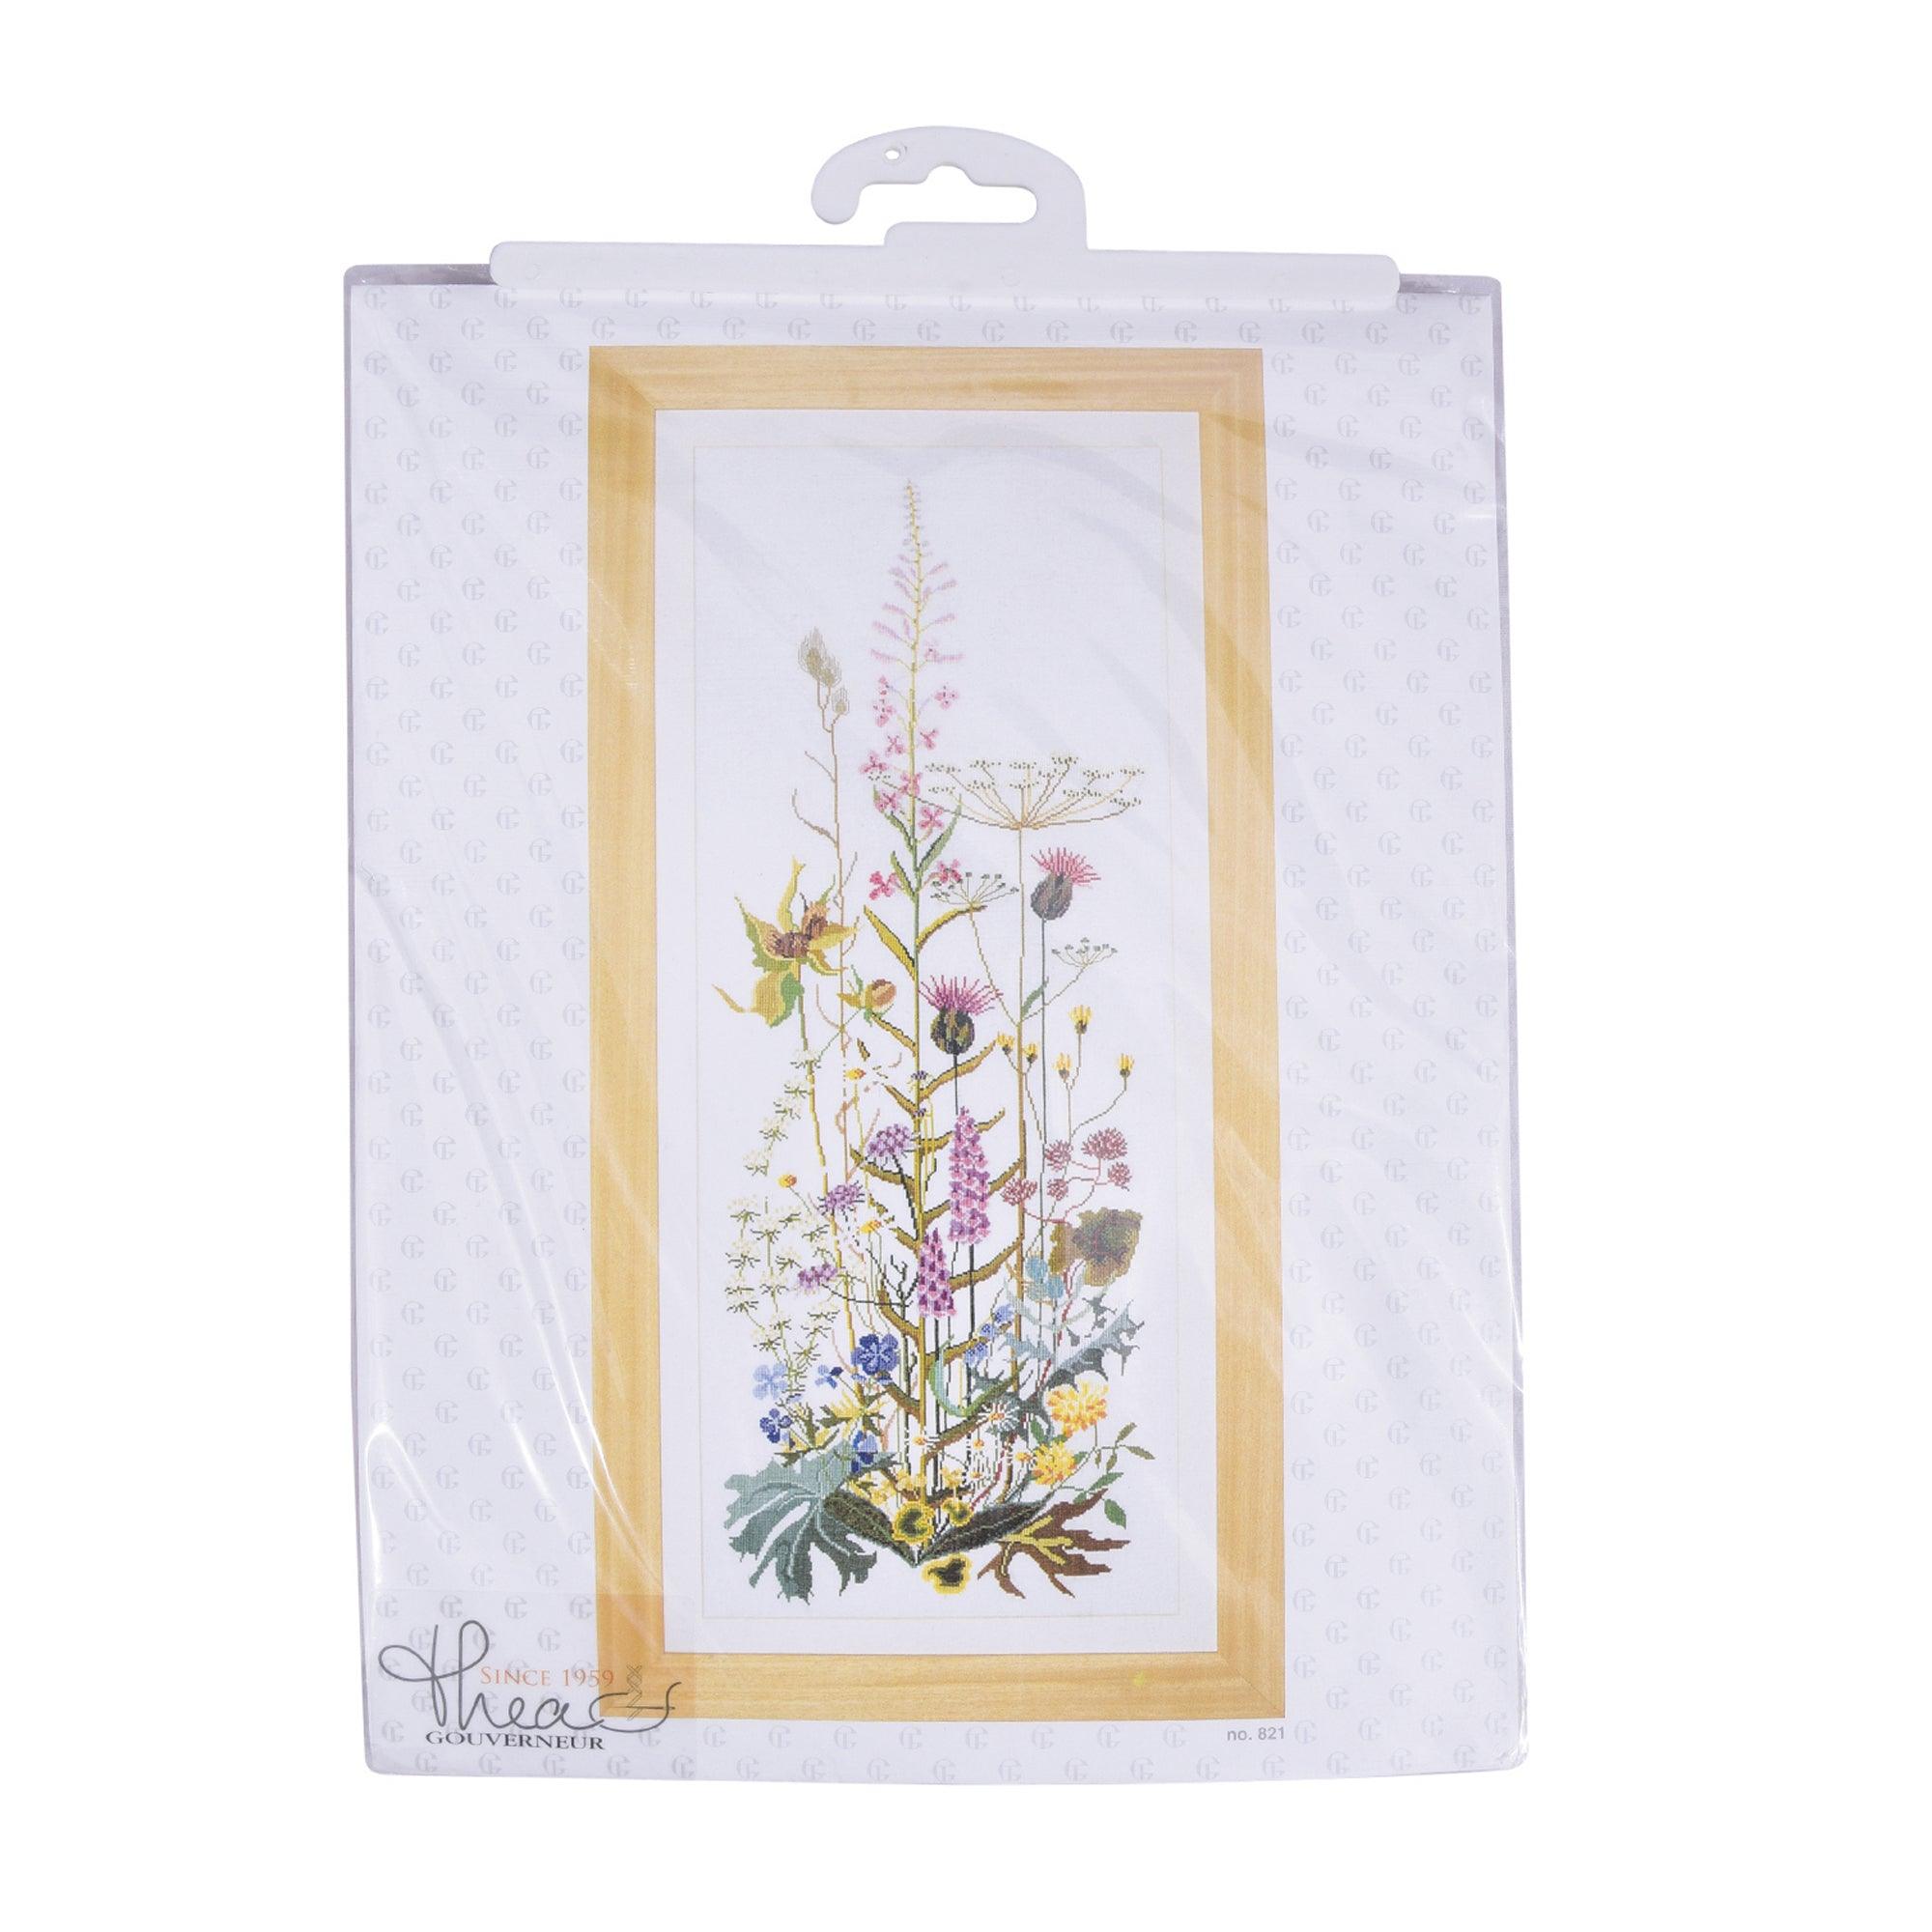 Thea Gouverneur - Counted Cross Stitch Kit - Wild Flowers - Aida - 16 count - 821A - Thea Gouverneur Since 1959